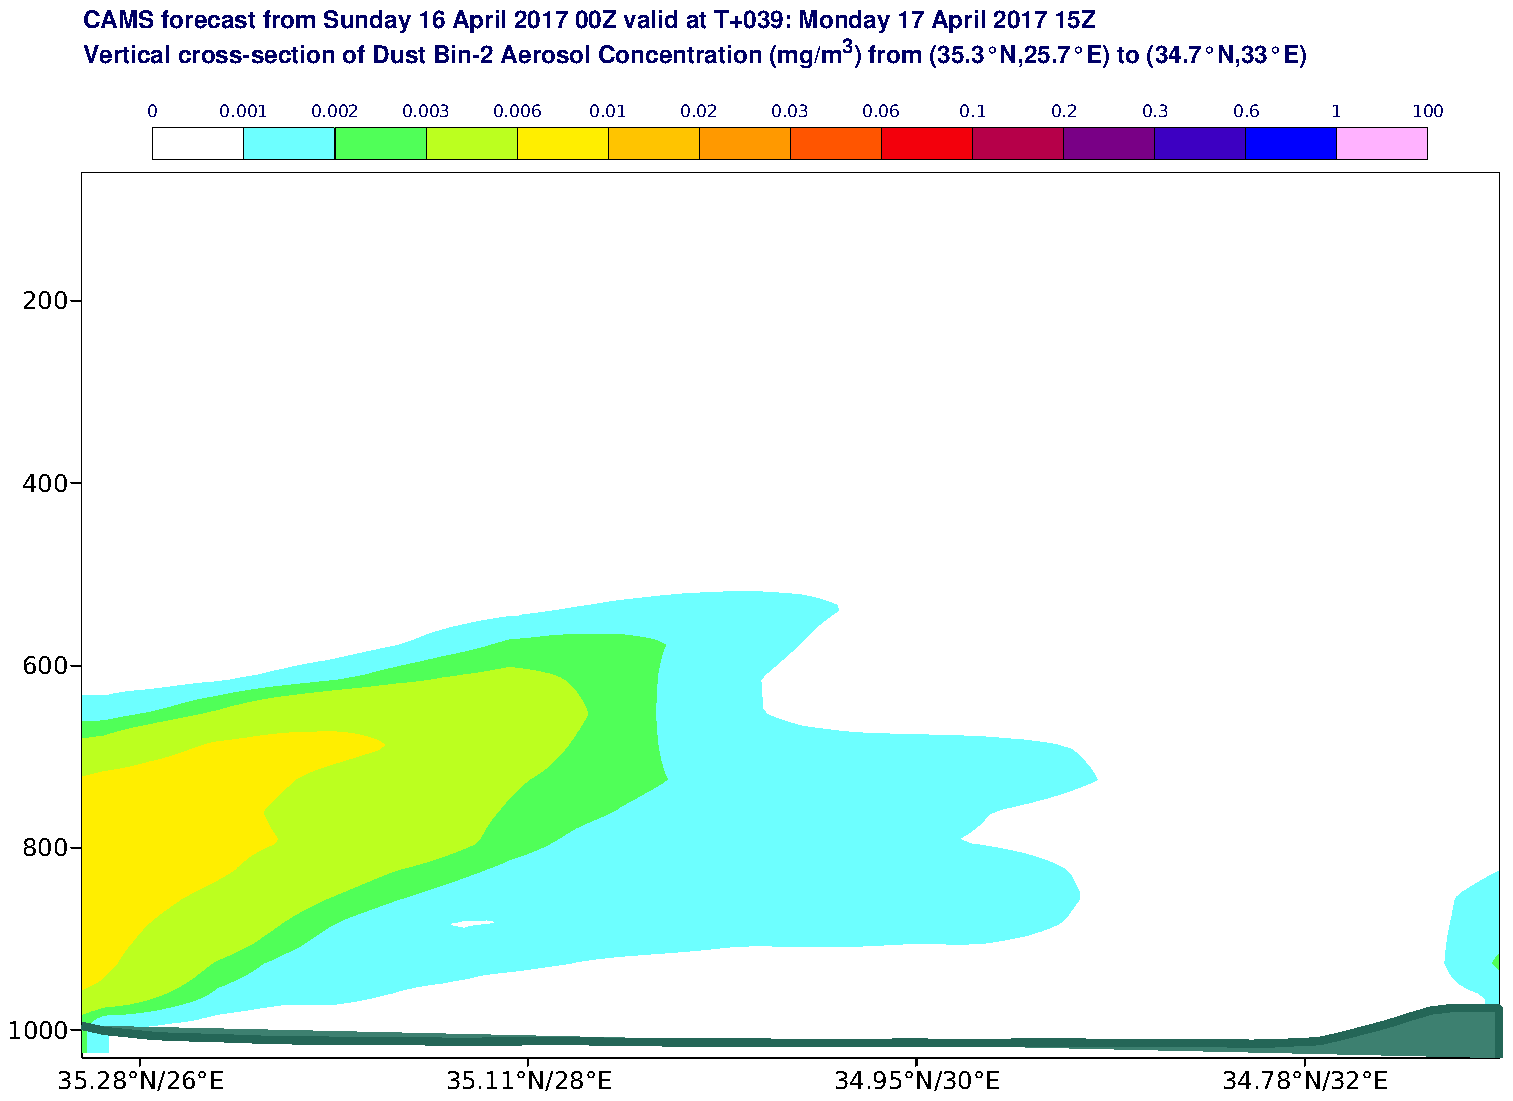 Vertical cross-section of Dust Bin-2 Aerosol Concentration (mg/m3) valid at T39 - 2017-04-17 15:00